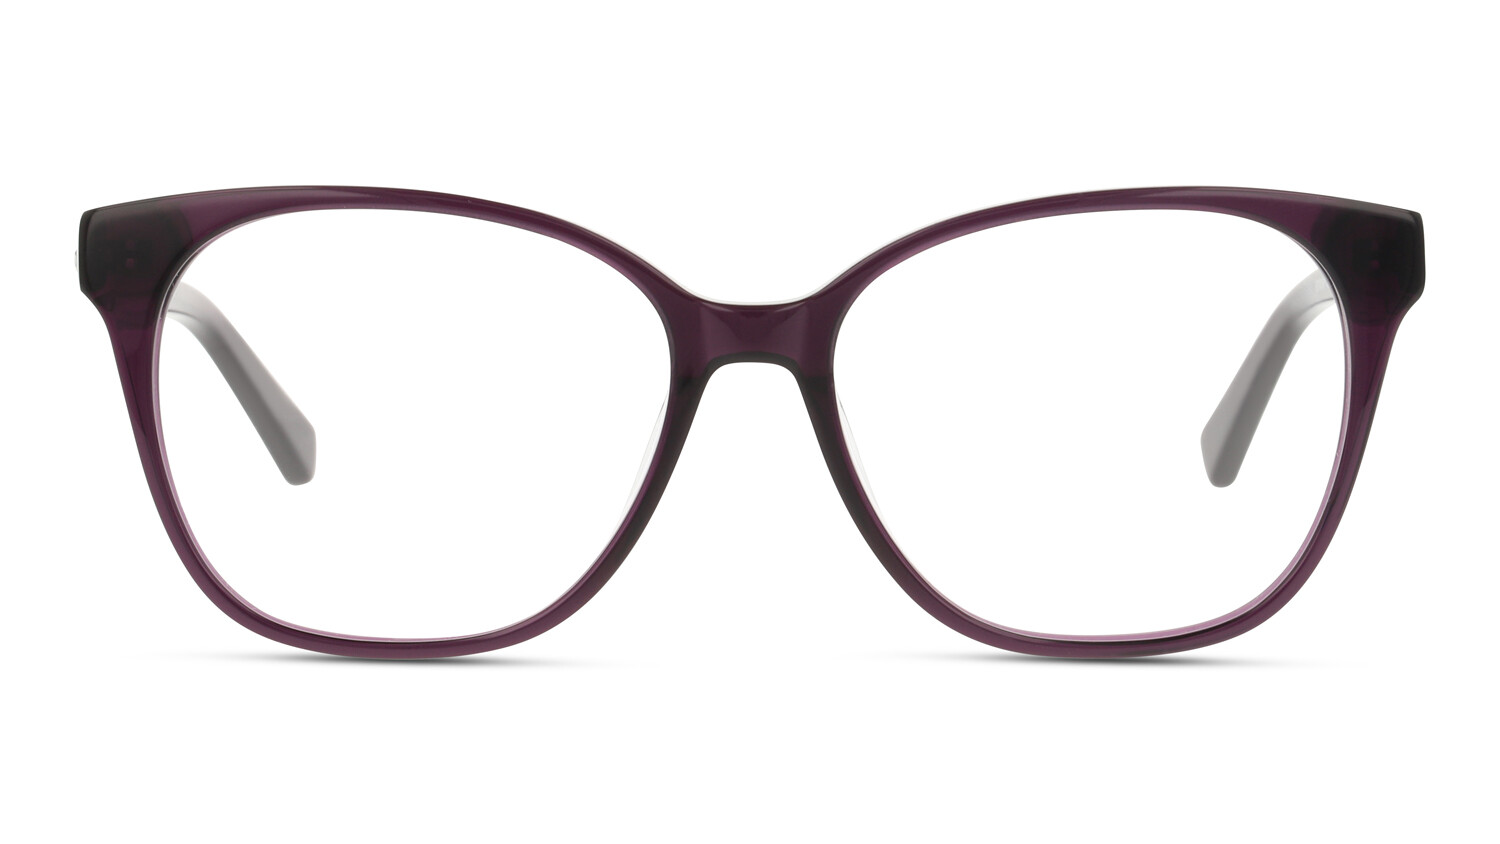 Front UNOFFICIAL UNOF0458 VV00 Brille Lila